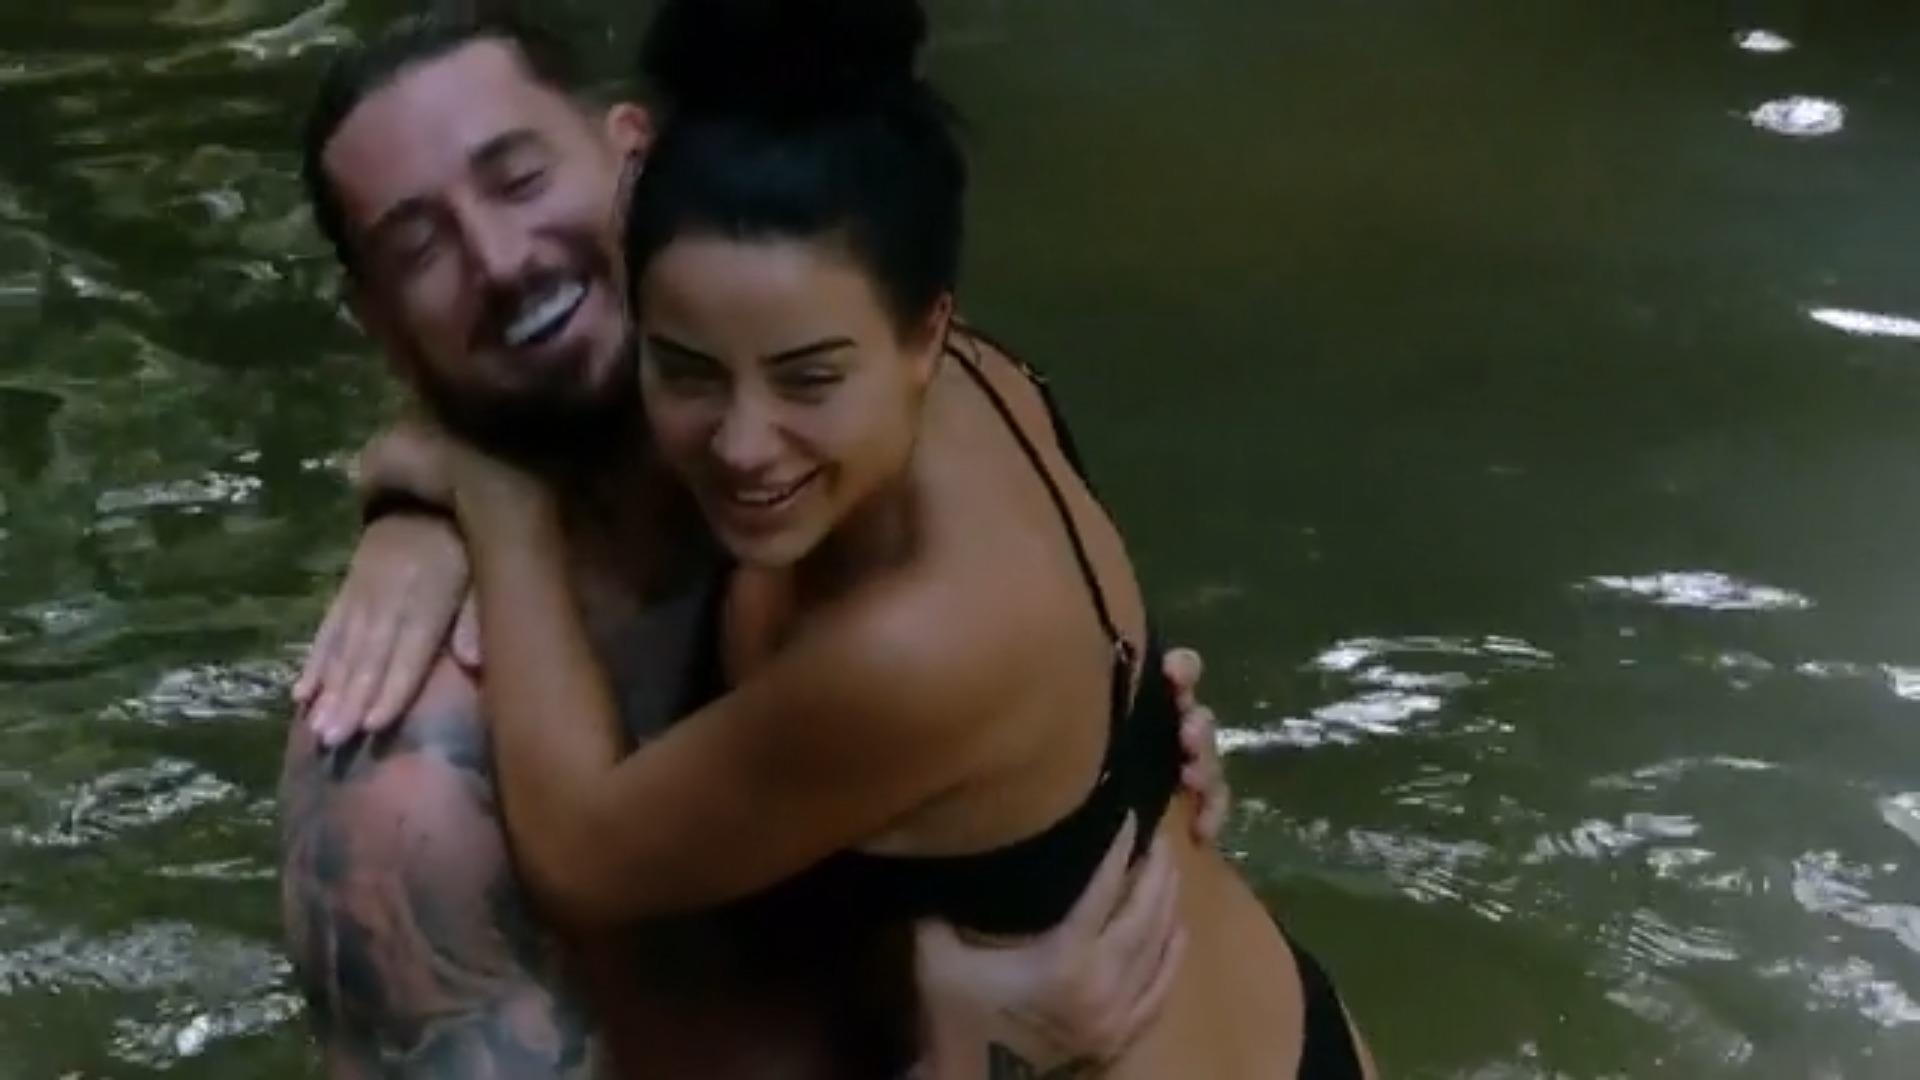 Mike and Leyla have fun in the cool water. Kim is bursting with jealousy